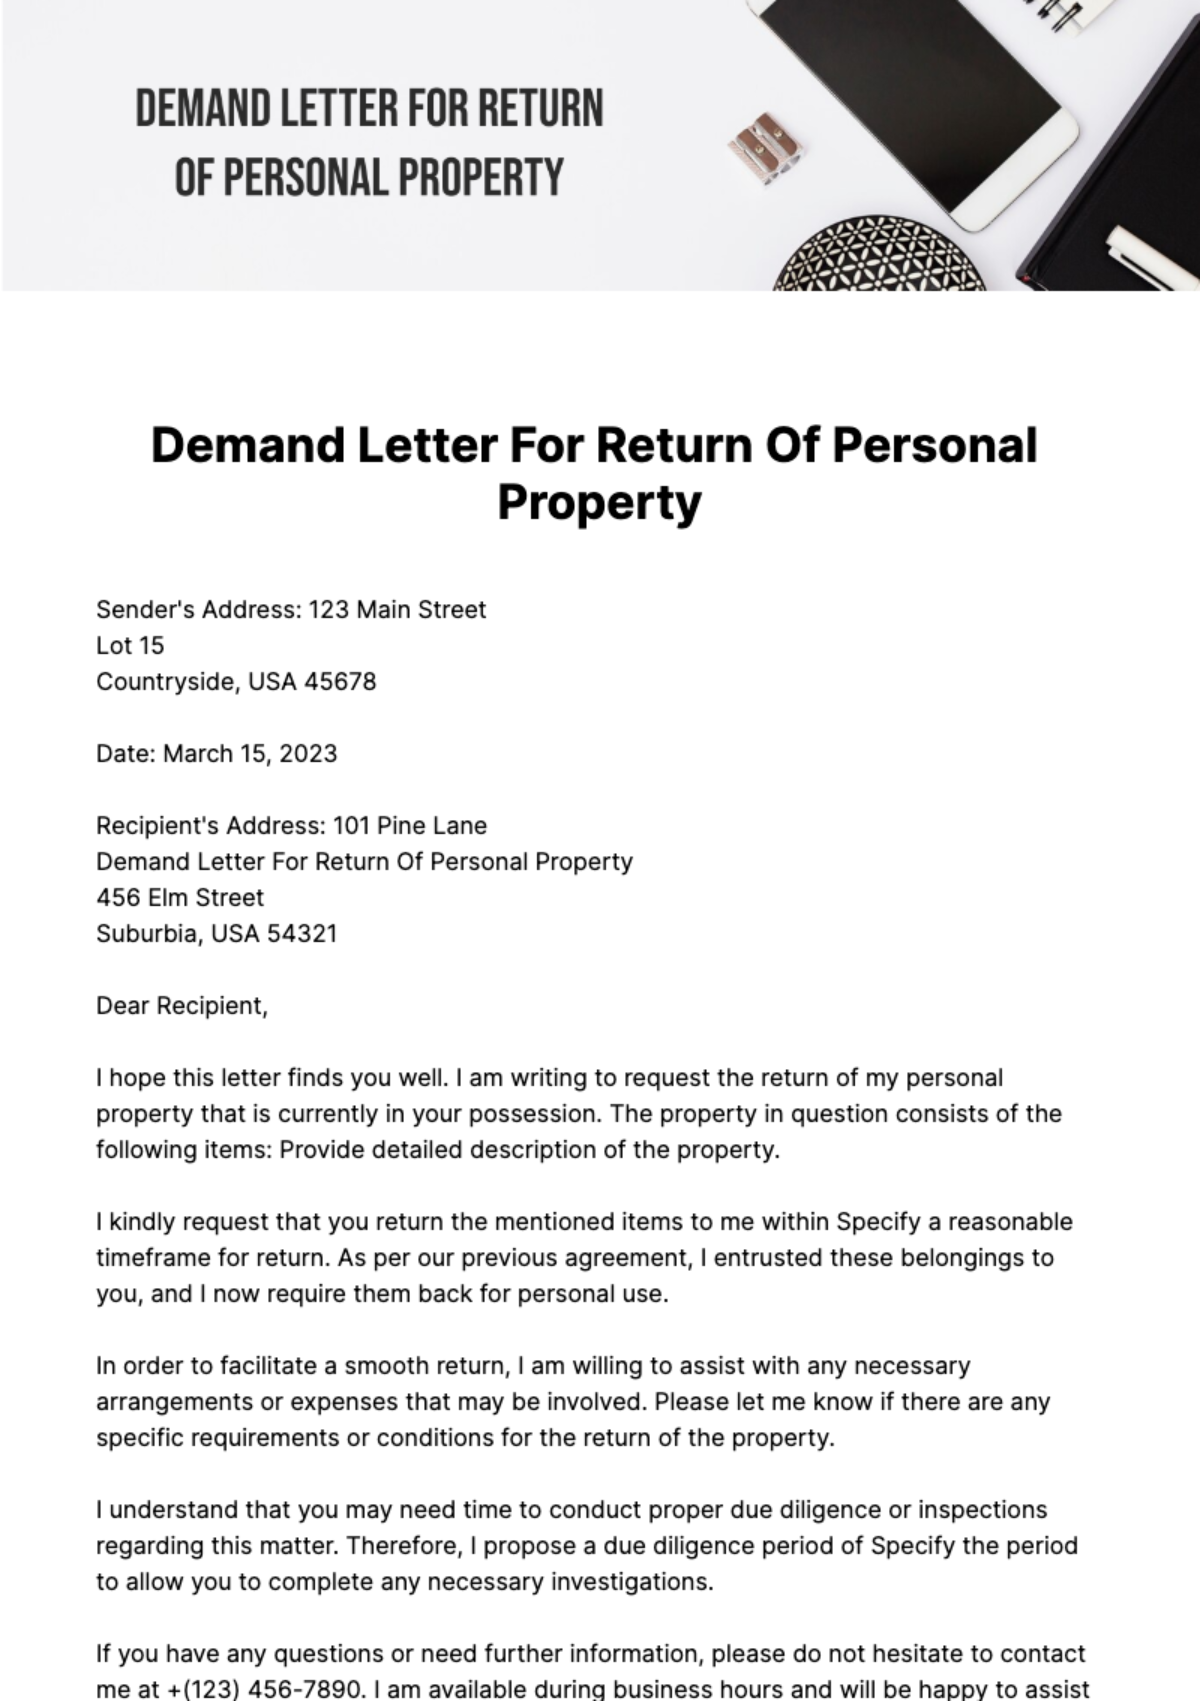 Free Demand Letter For Return Of Personal Property Template